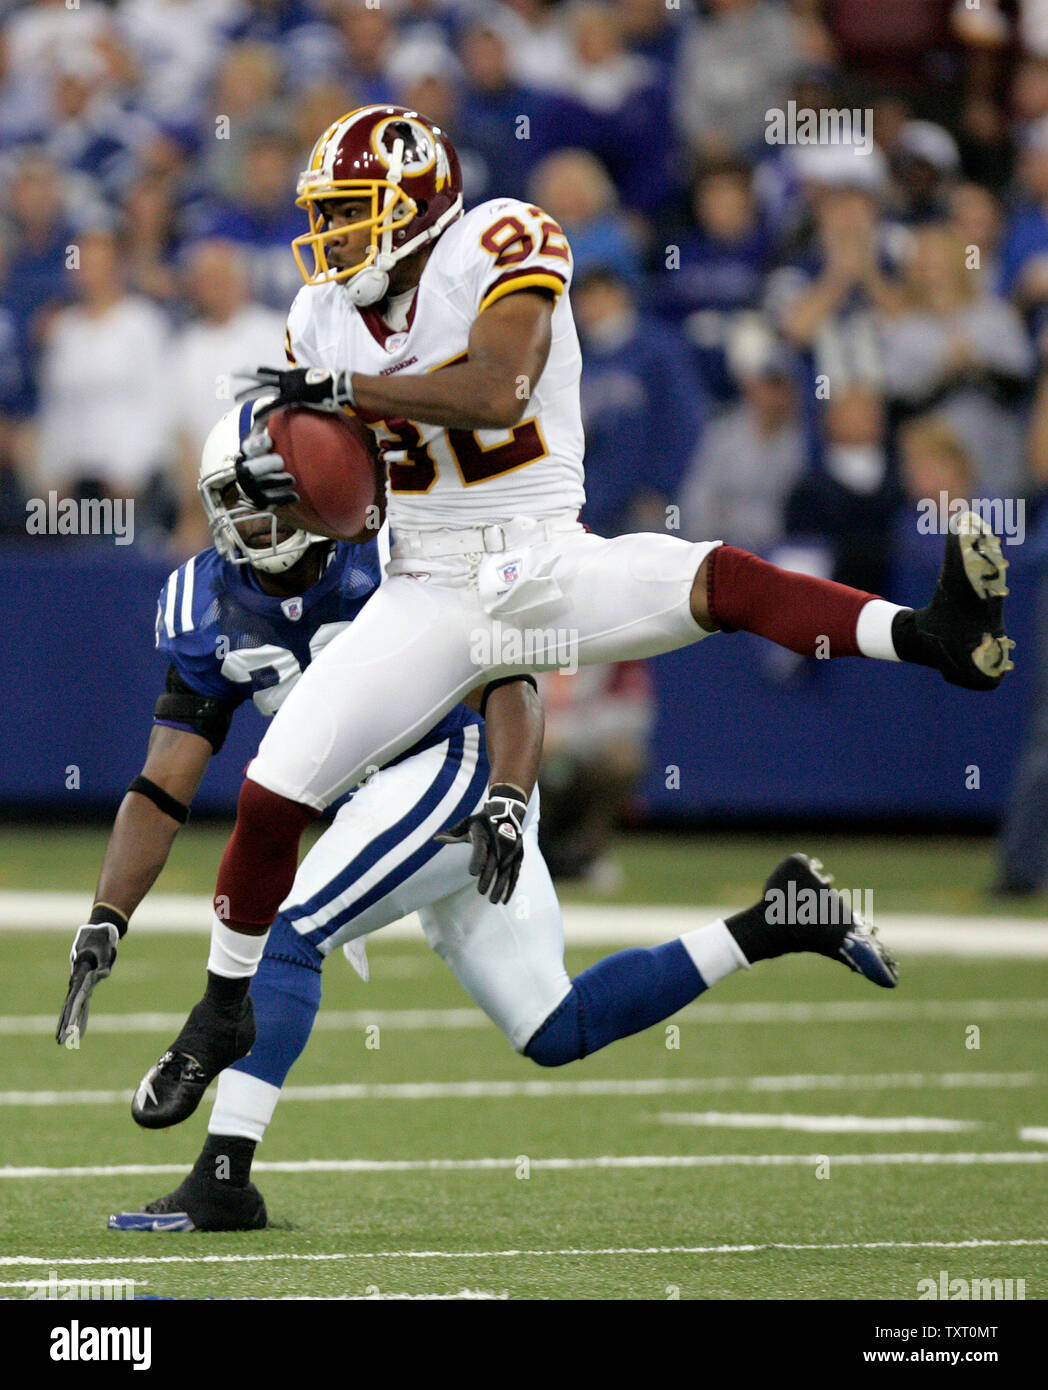 Washington Redskins wide receiver Antwaan Randle El (82) grabs a pass in front of Indianapolis Colts defensive back Mike Doss (20) at the RCA Dome in Indianapolis on October 22, 2006. (UPI Photo/Mark Cowan) Stock Photo